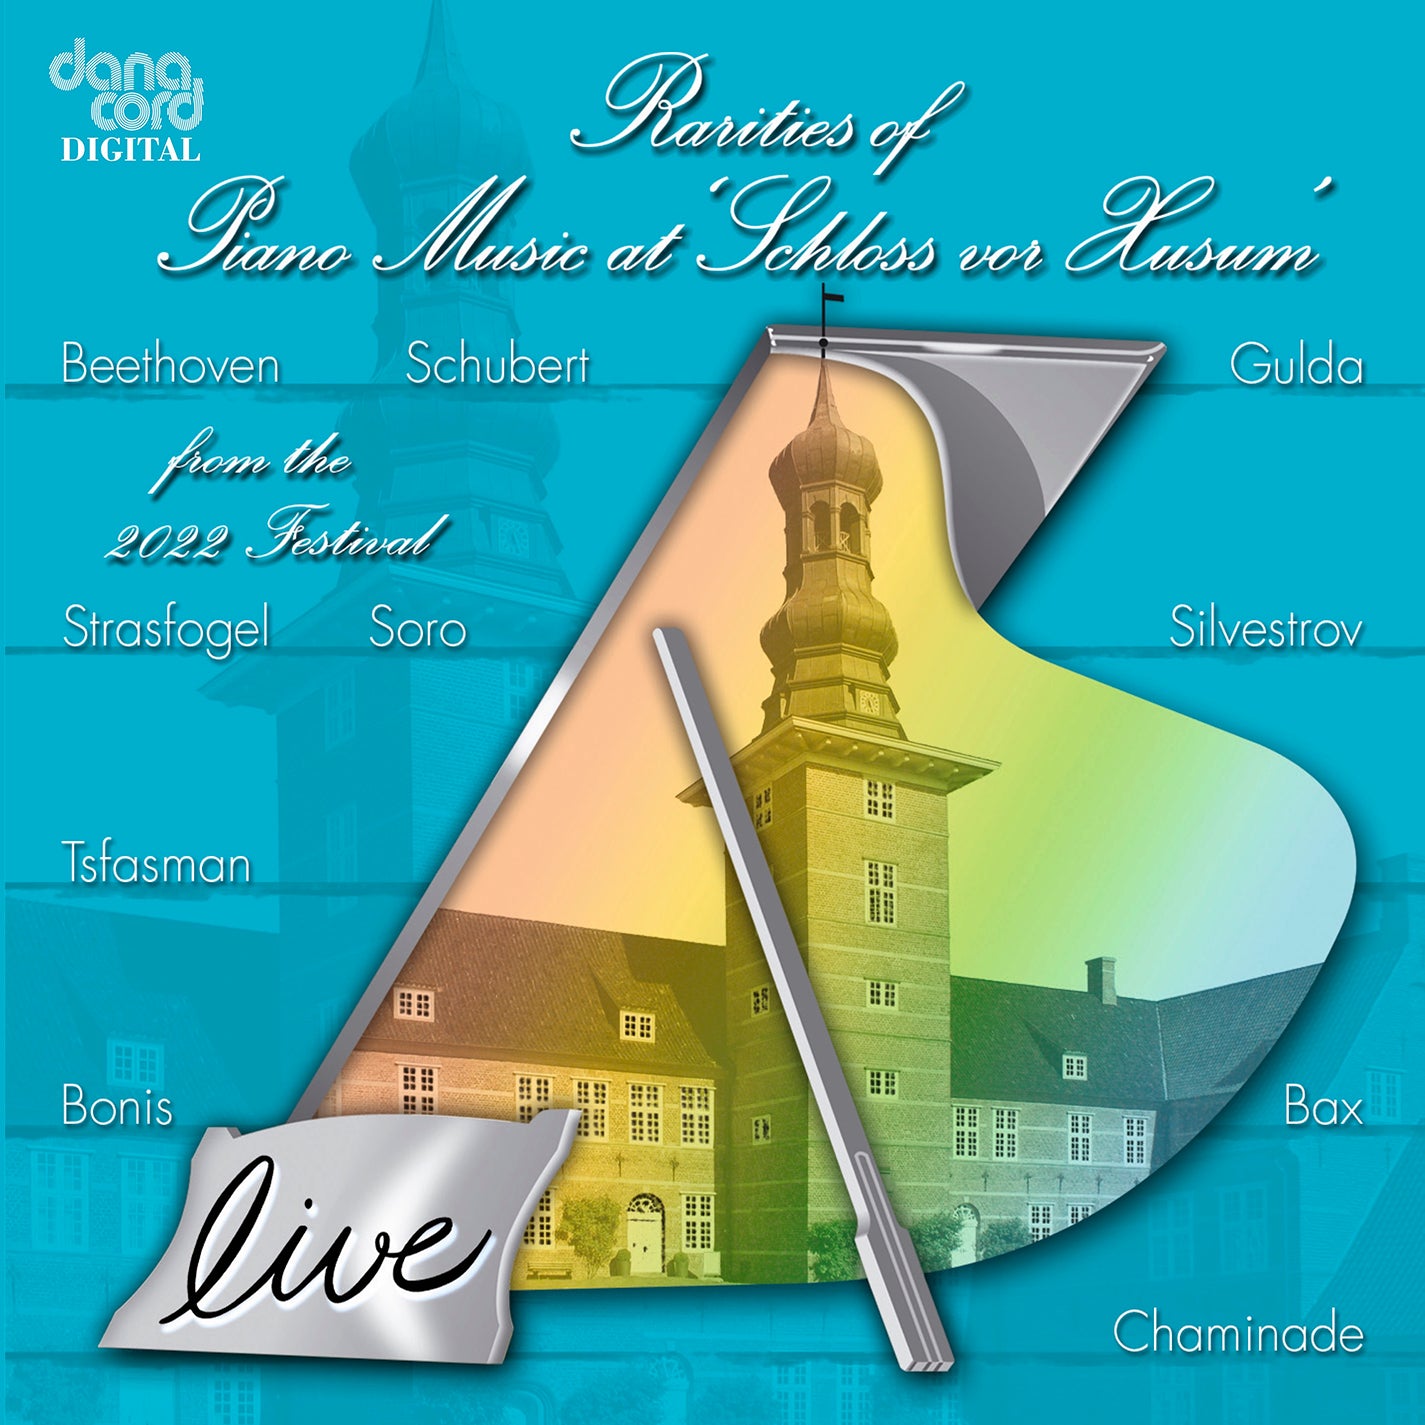 Rarities of Piano Music at "Schloss vor Husum" from the 2022 Festival